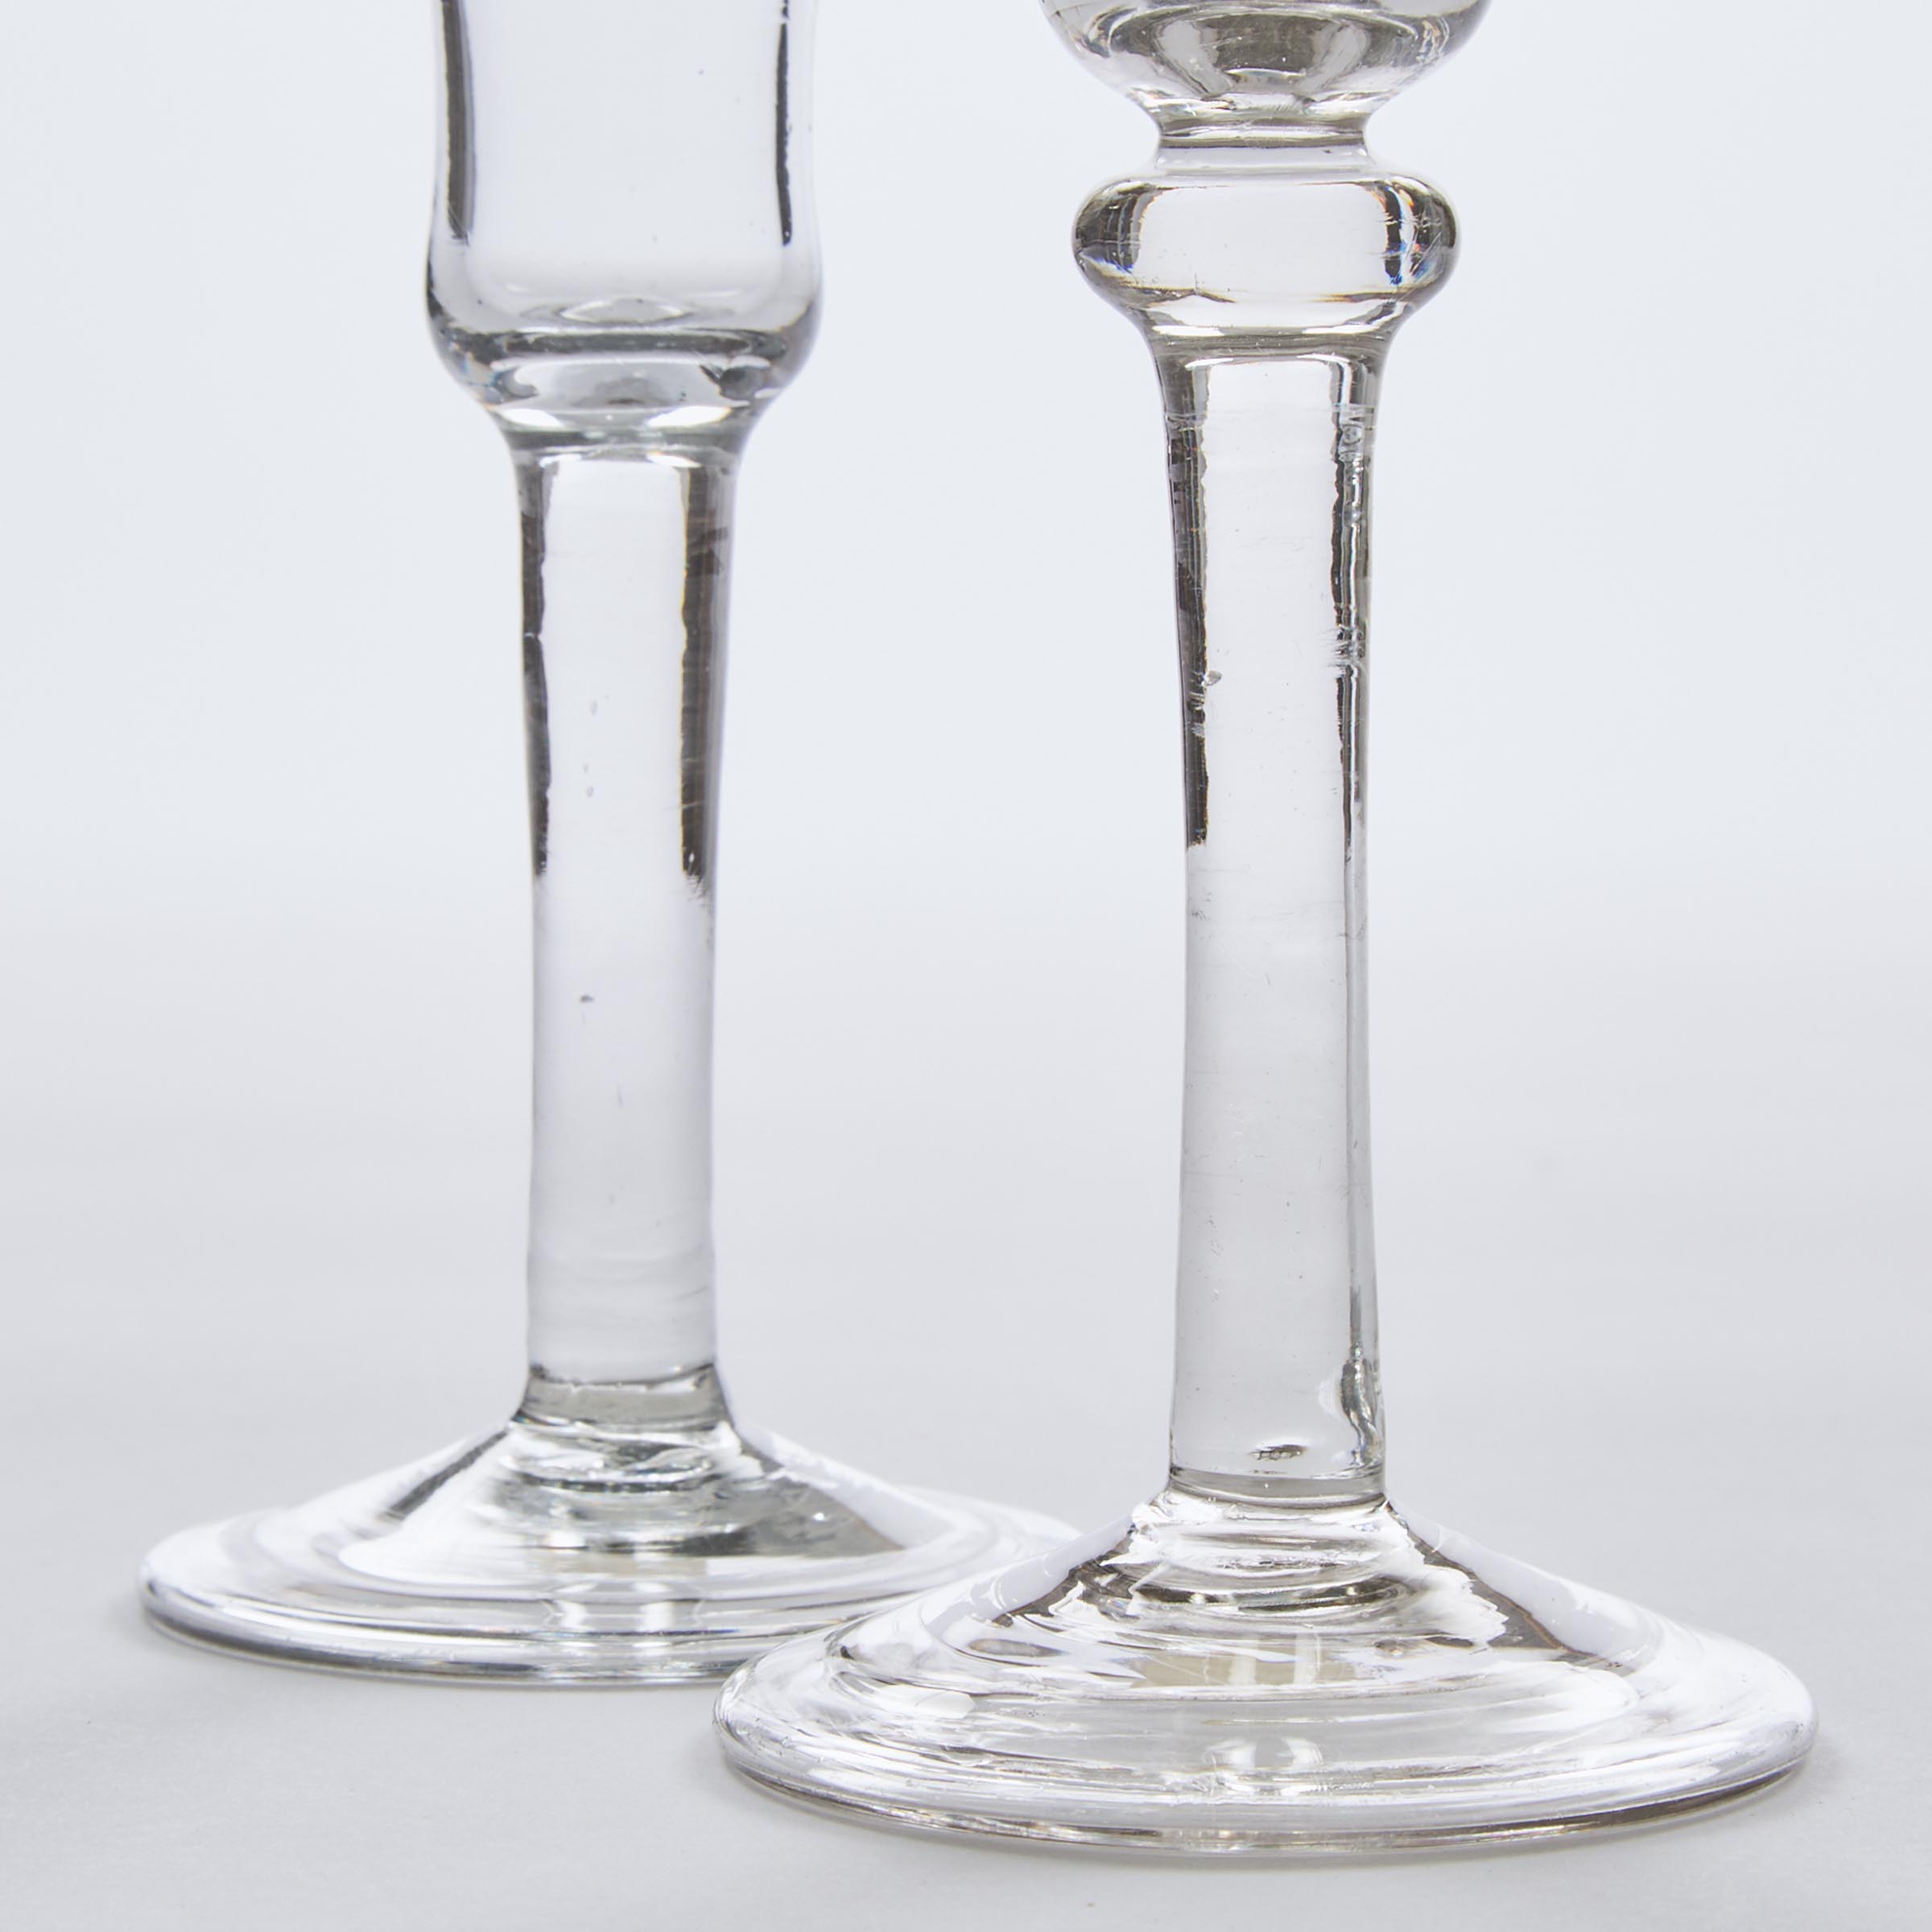 Two English Balustroid or Plain Stemmed Wine Glasses, mid-18th century